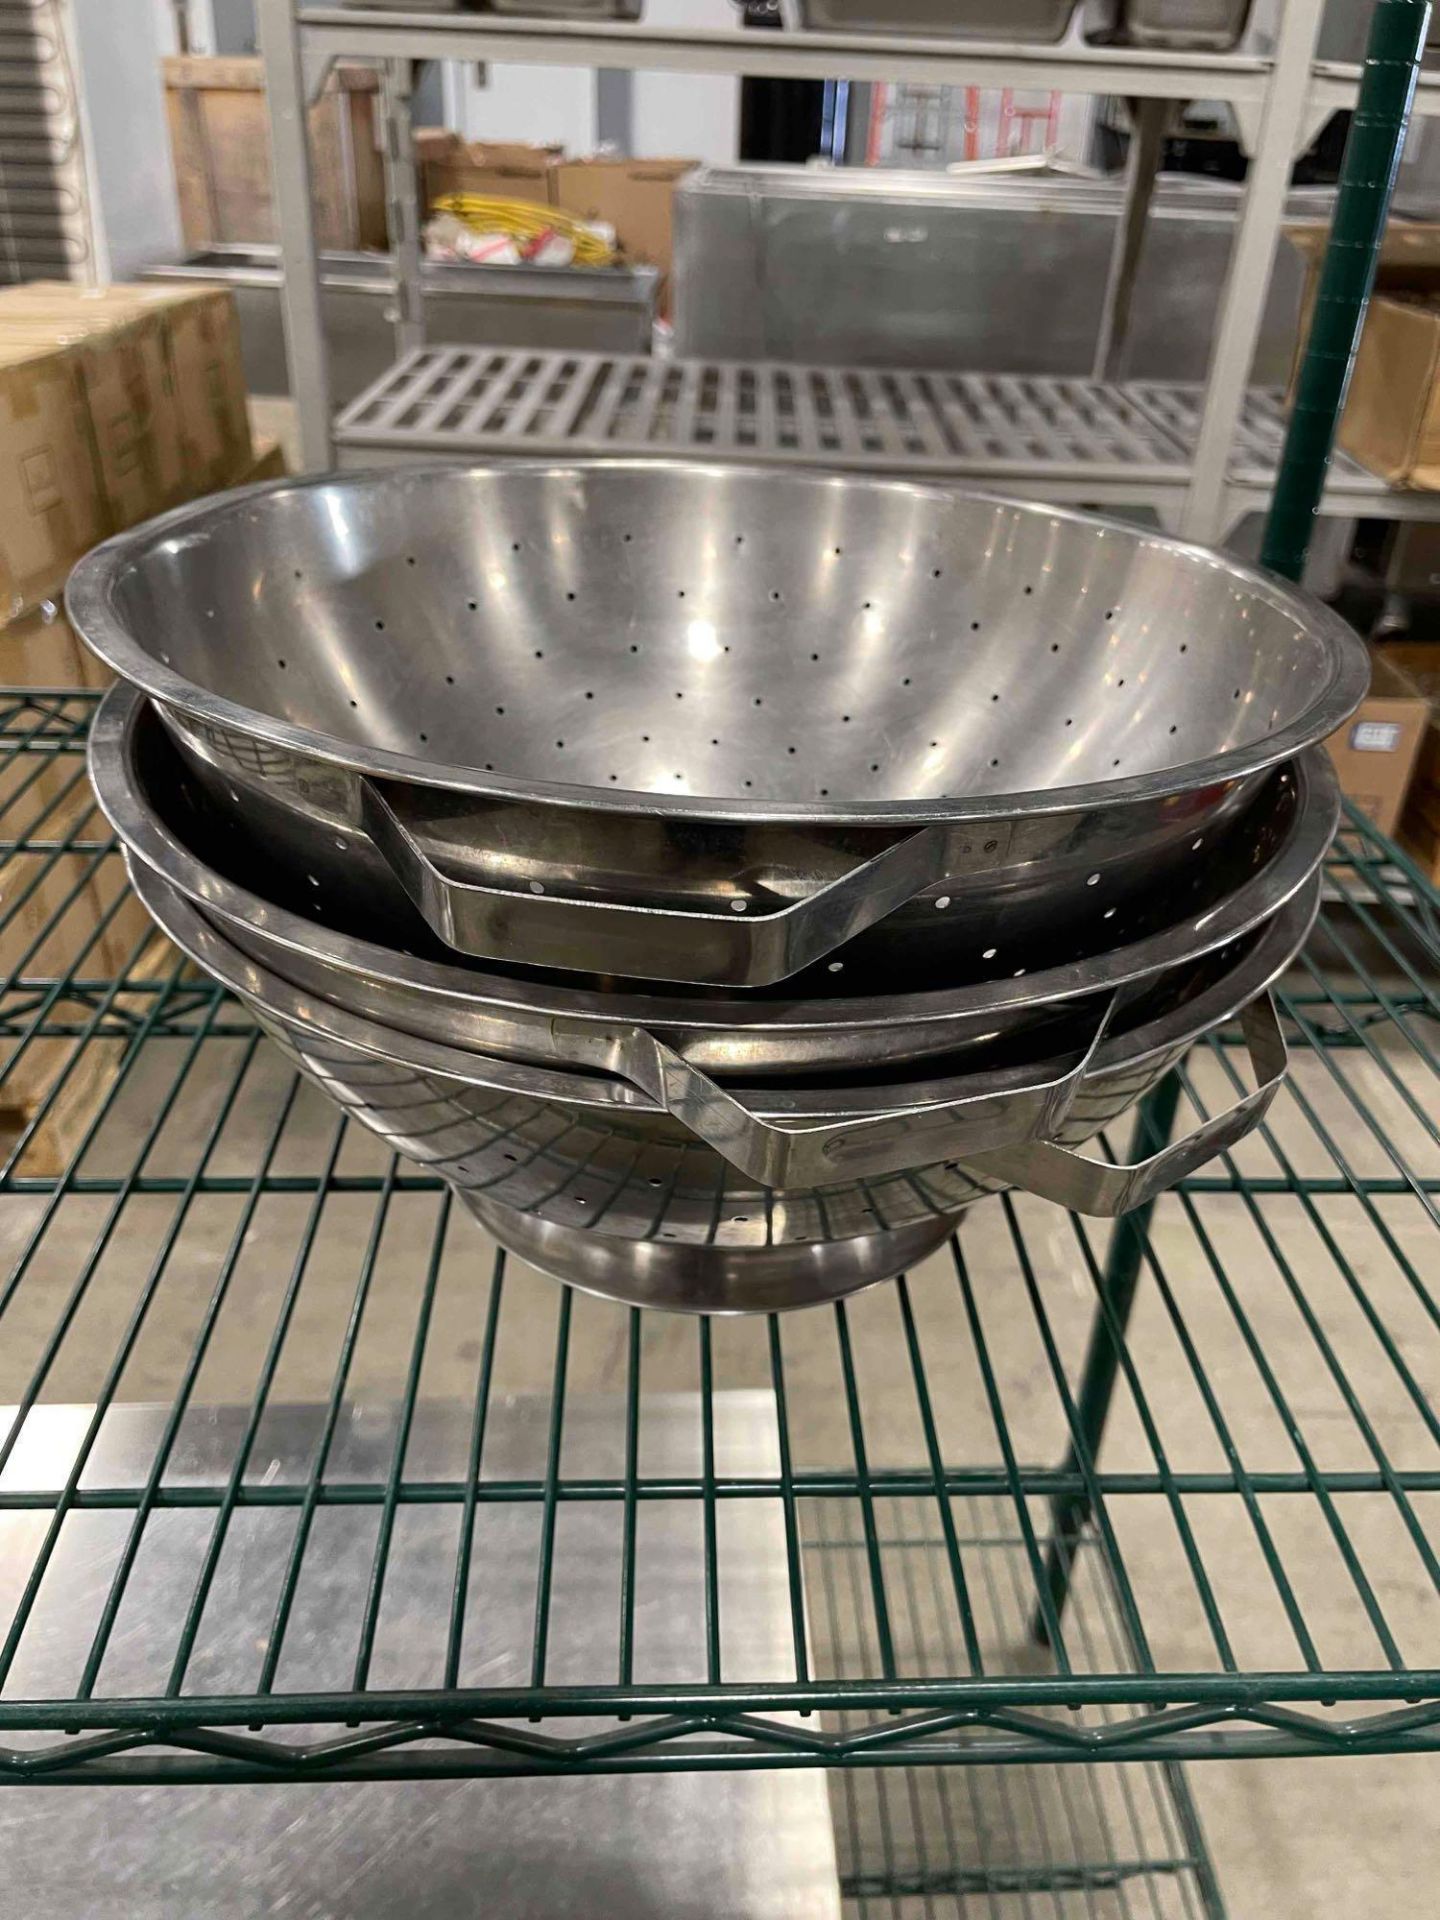 (3) LARGE STAINLESS STEEL COLANDER - Image 3 of 3